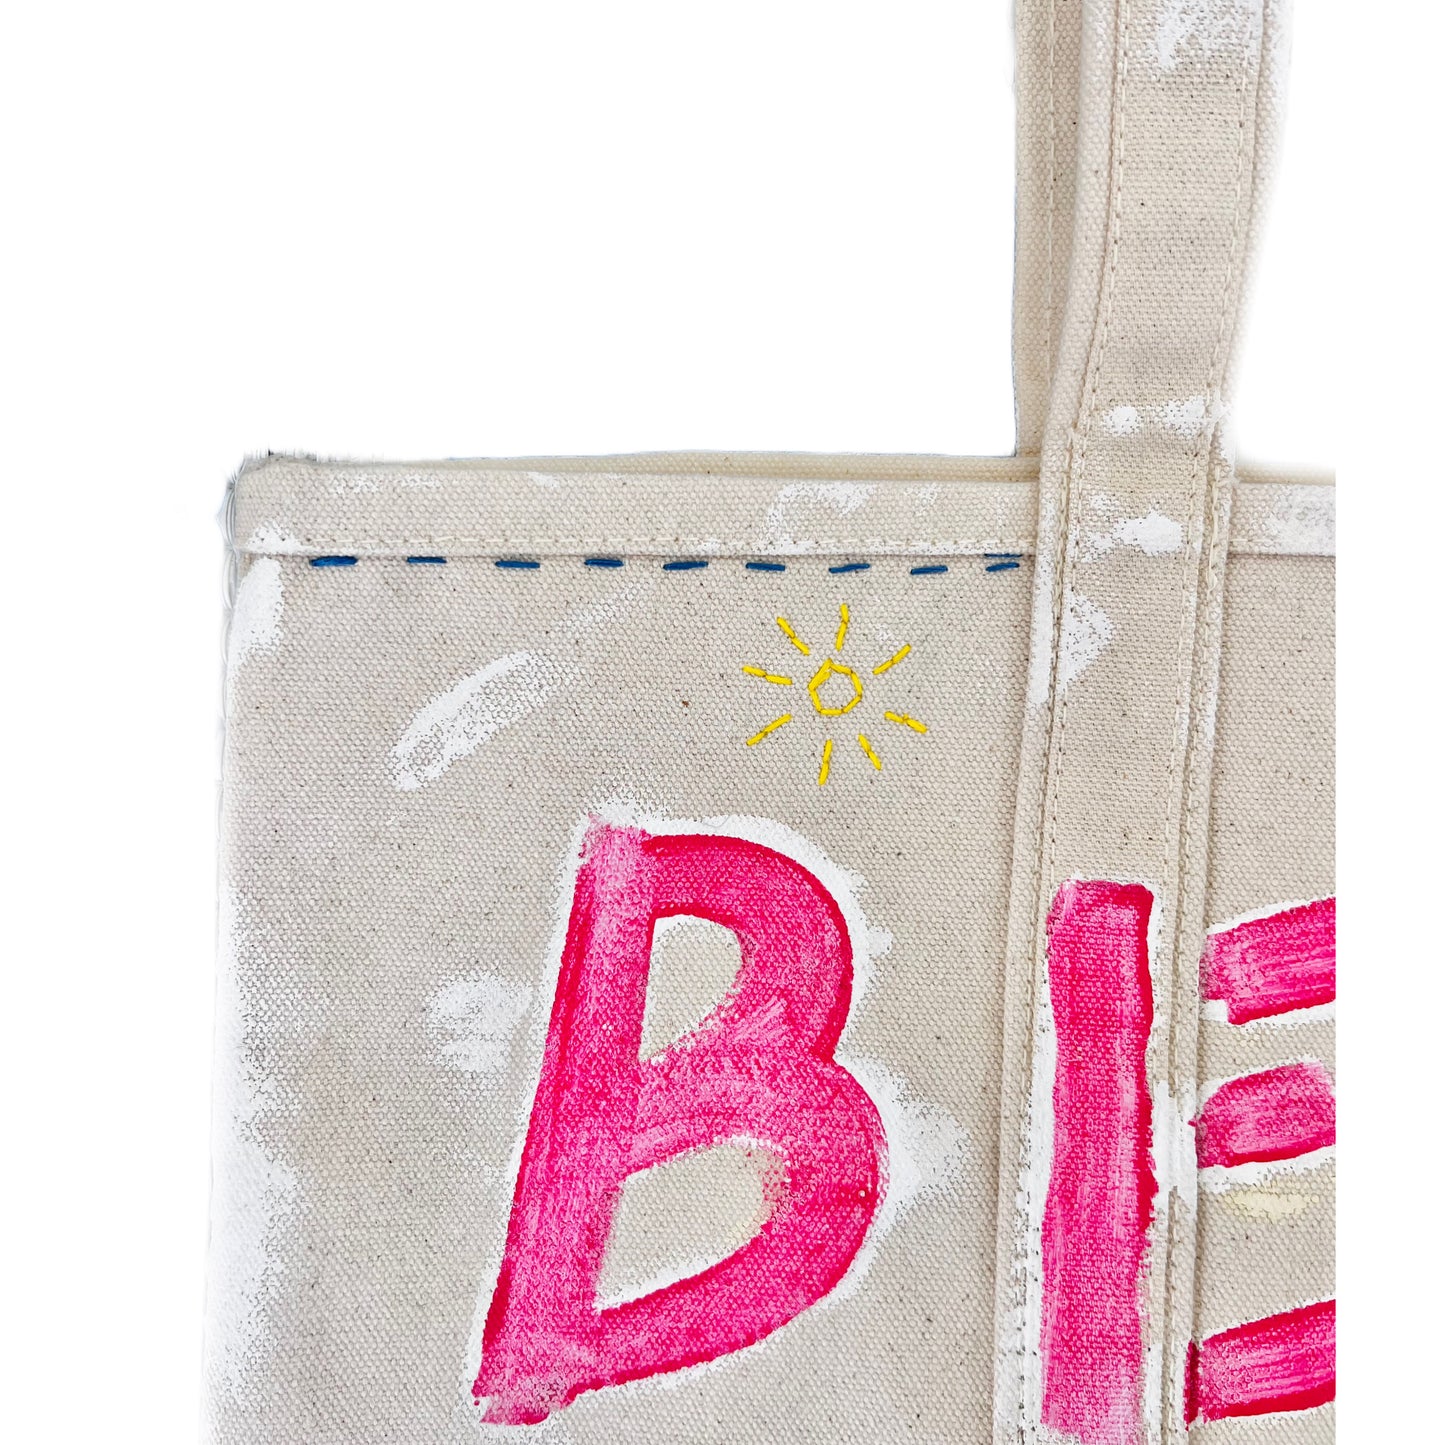 EVERY DAY TOTE - BEACH BAG